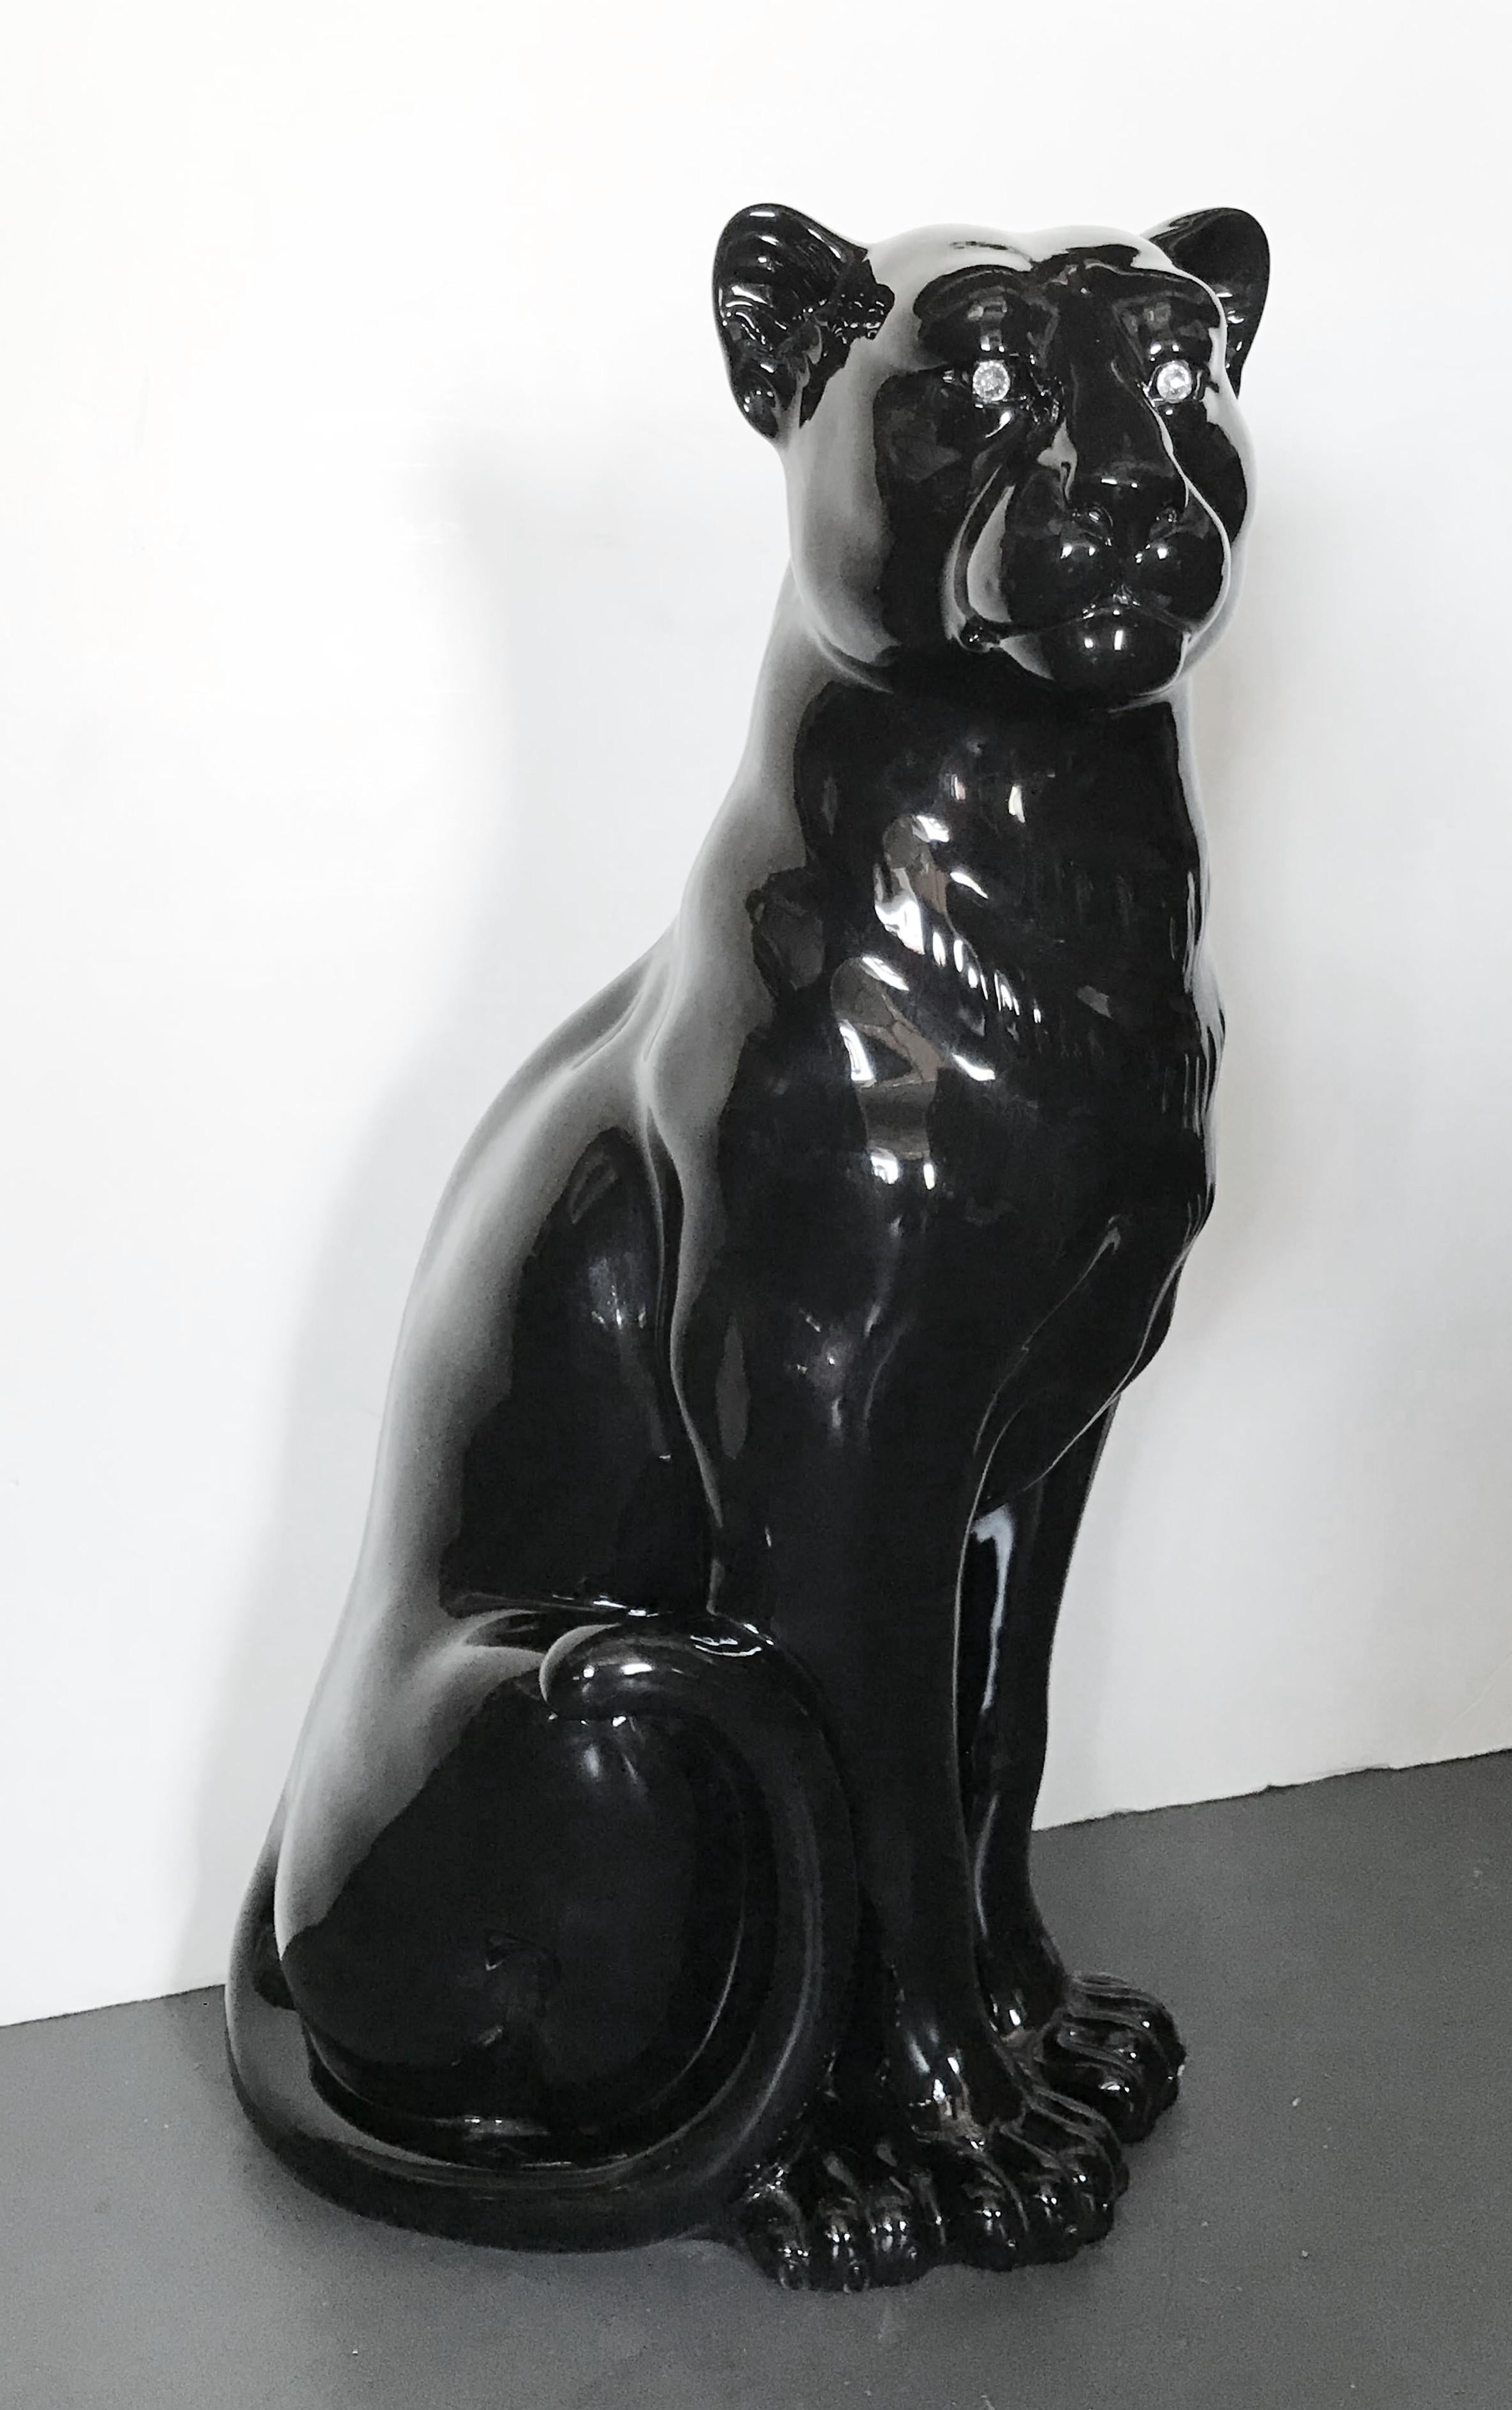 Italian black ceramic decorative puma sculpture with Swarovski crystal eyes by Fabio Ltd / Made in Italy
Measures: Height 34 inches, diameter 18 inches
1 available in stock in Palm Springs on FINAL CLEARANCE SALE for $899 !
Order reference #: